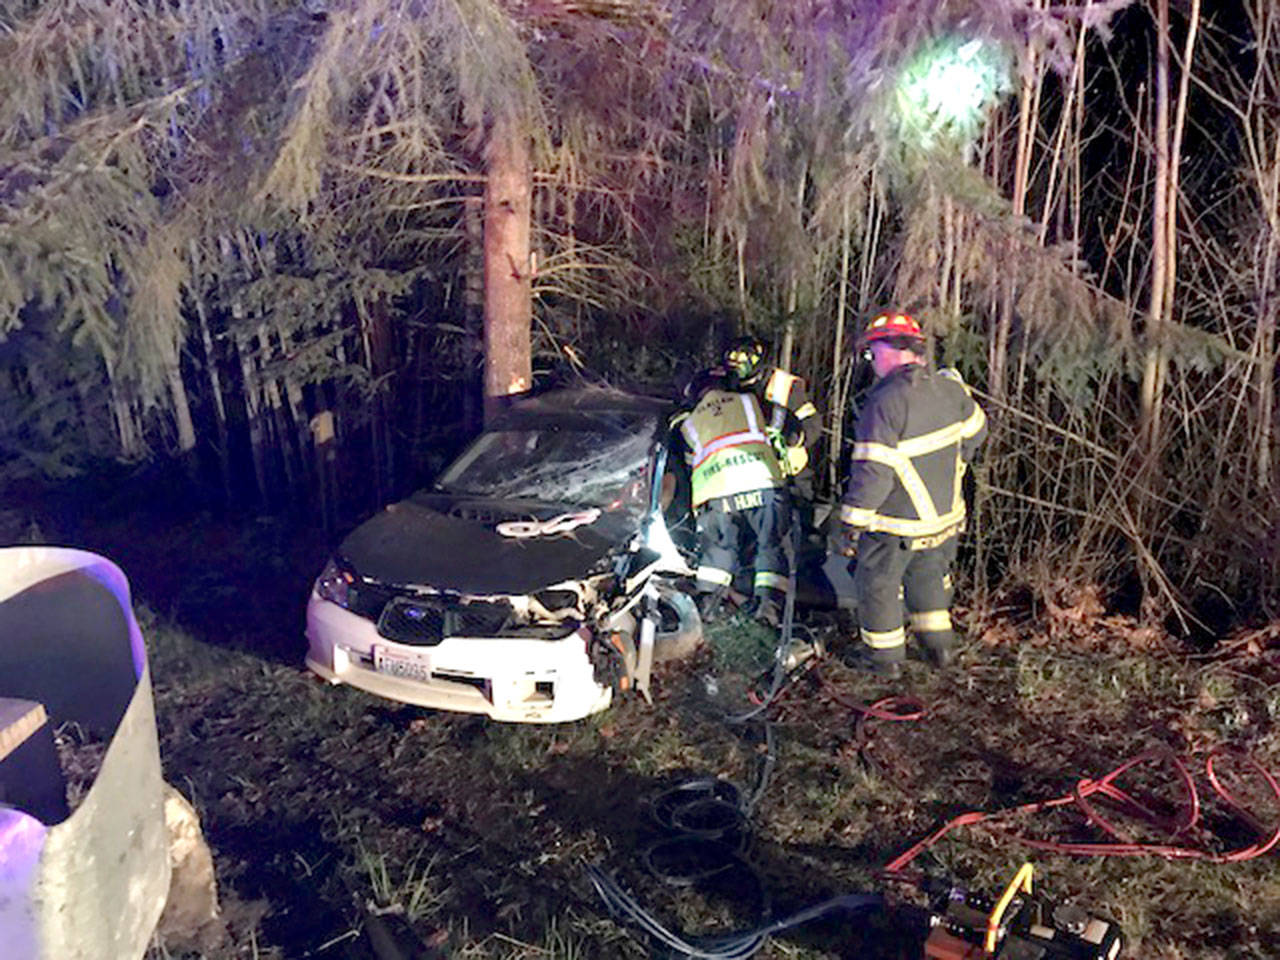 A Port Angeles man was hurt early Saturday morning when the Subaru Impreza he was driving hit a barrier on Deer Park Road and went down an embankment. (Clallam Fire District No. 2)